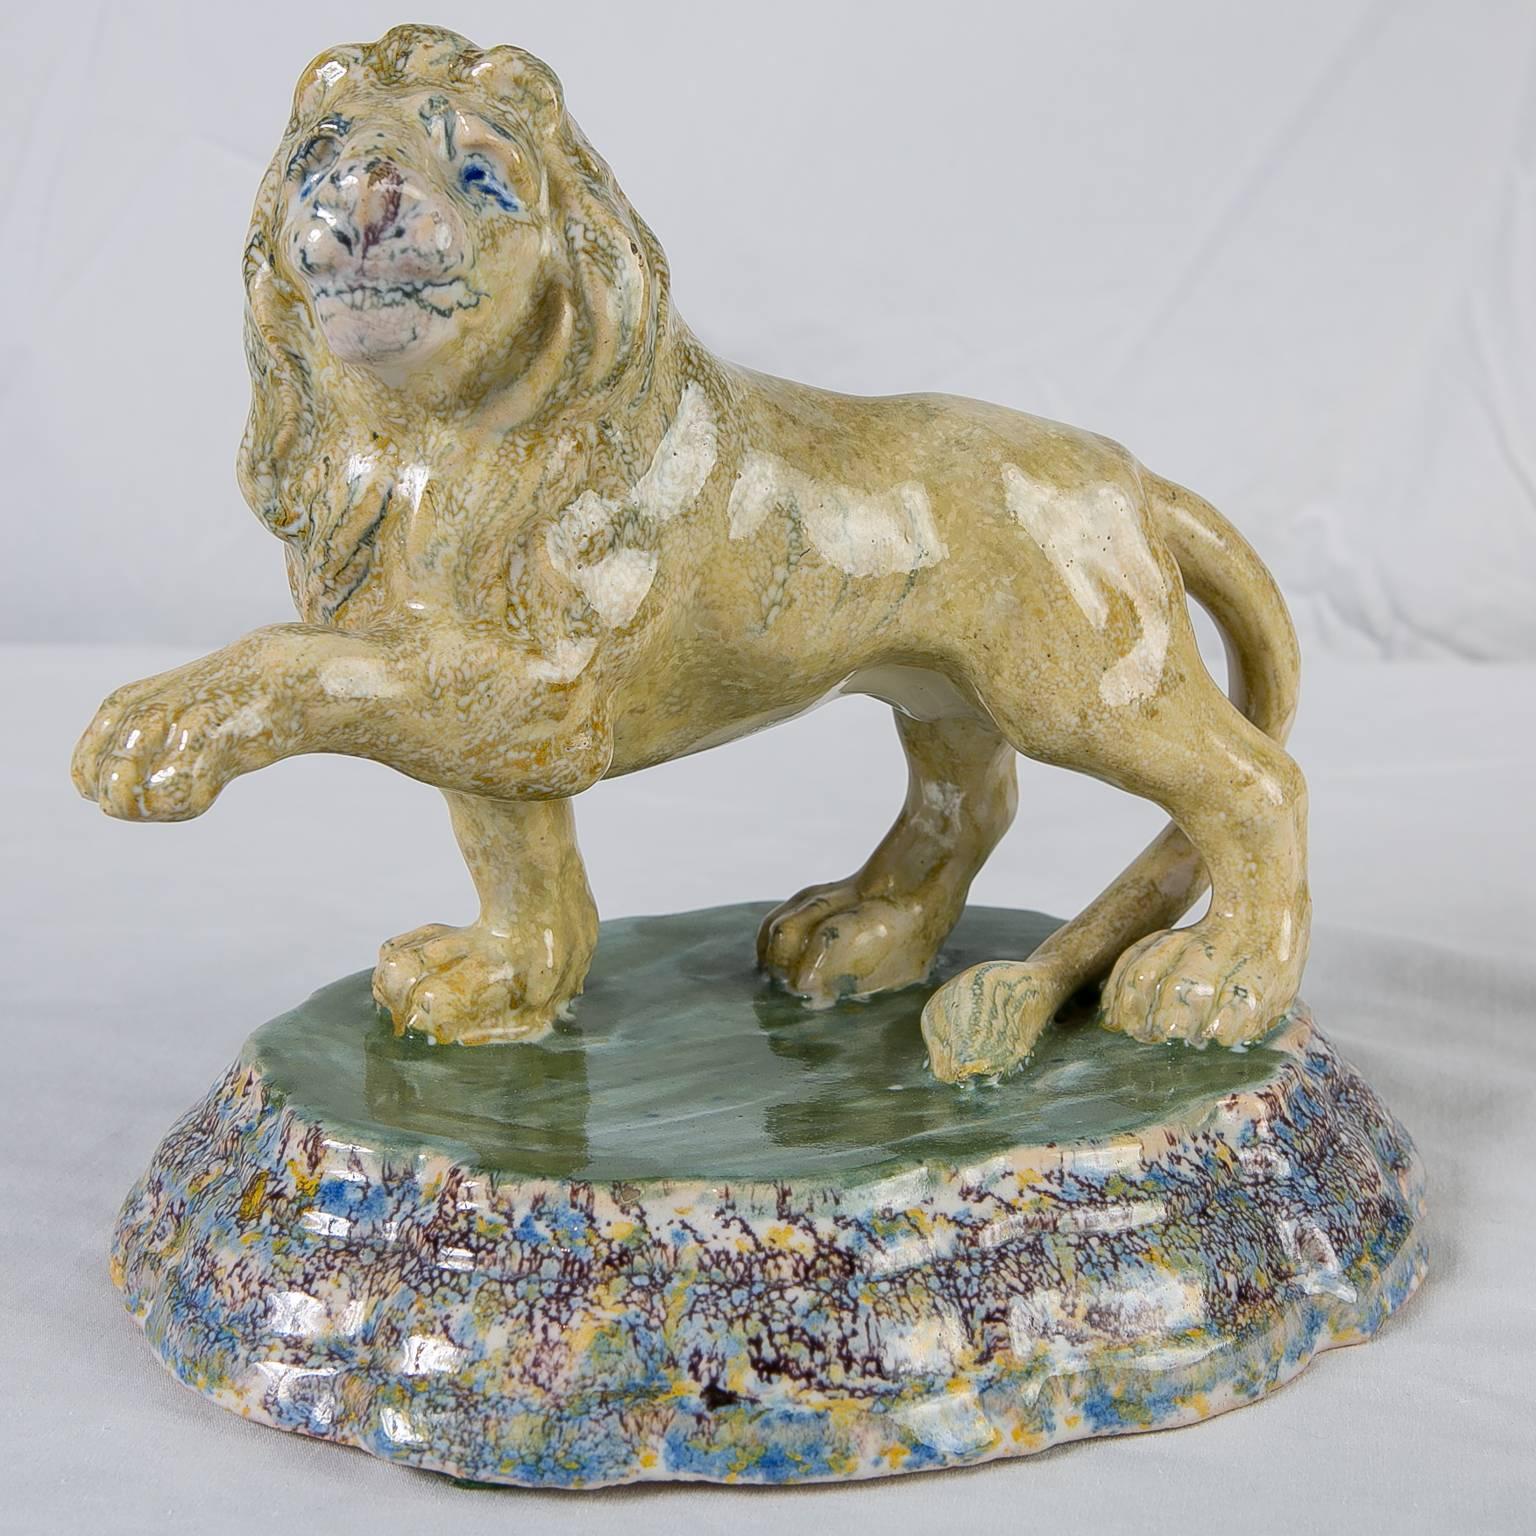 A Dutch Delft model of a lion. This rare 18th century Delft lion is naturalistically modeled. Shown striding forward with an outstretched paw. While most lions are fierce this one has a particularly friendly face and whimsical expression.
Lions